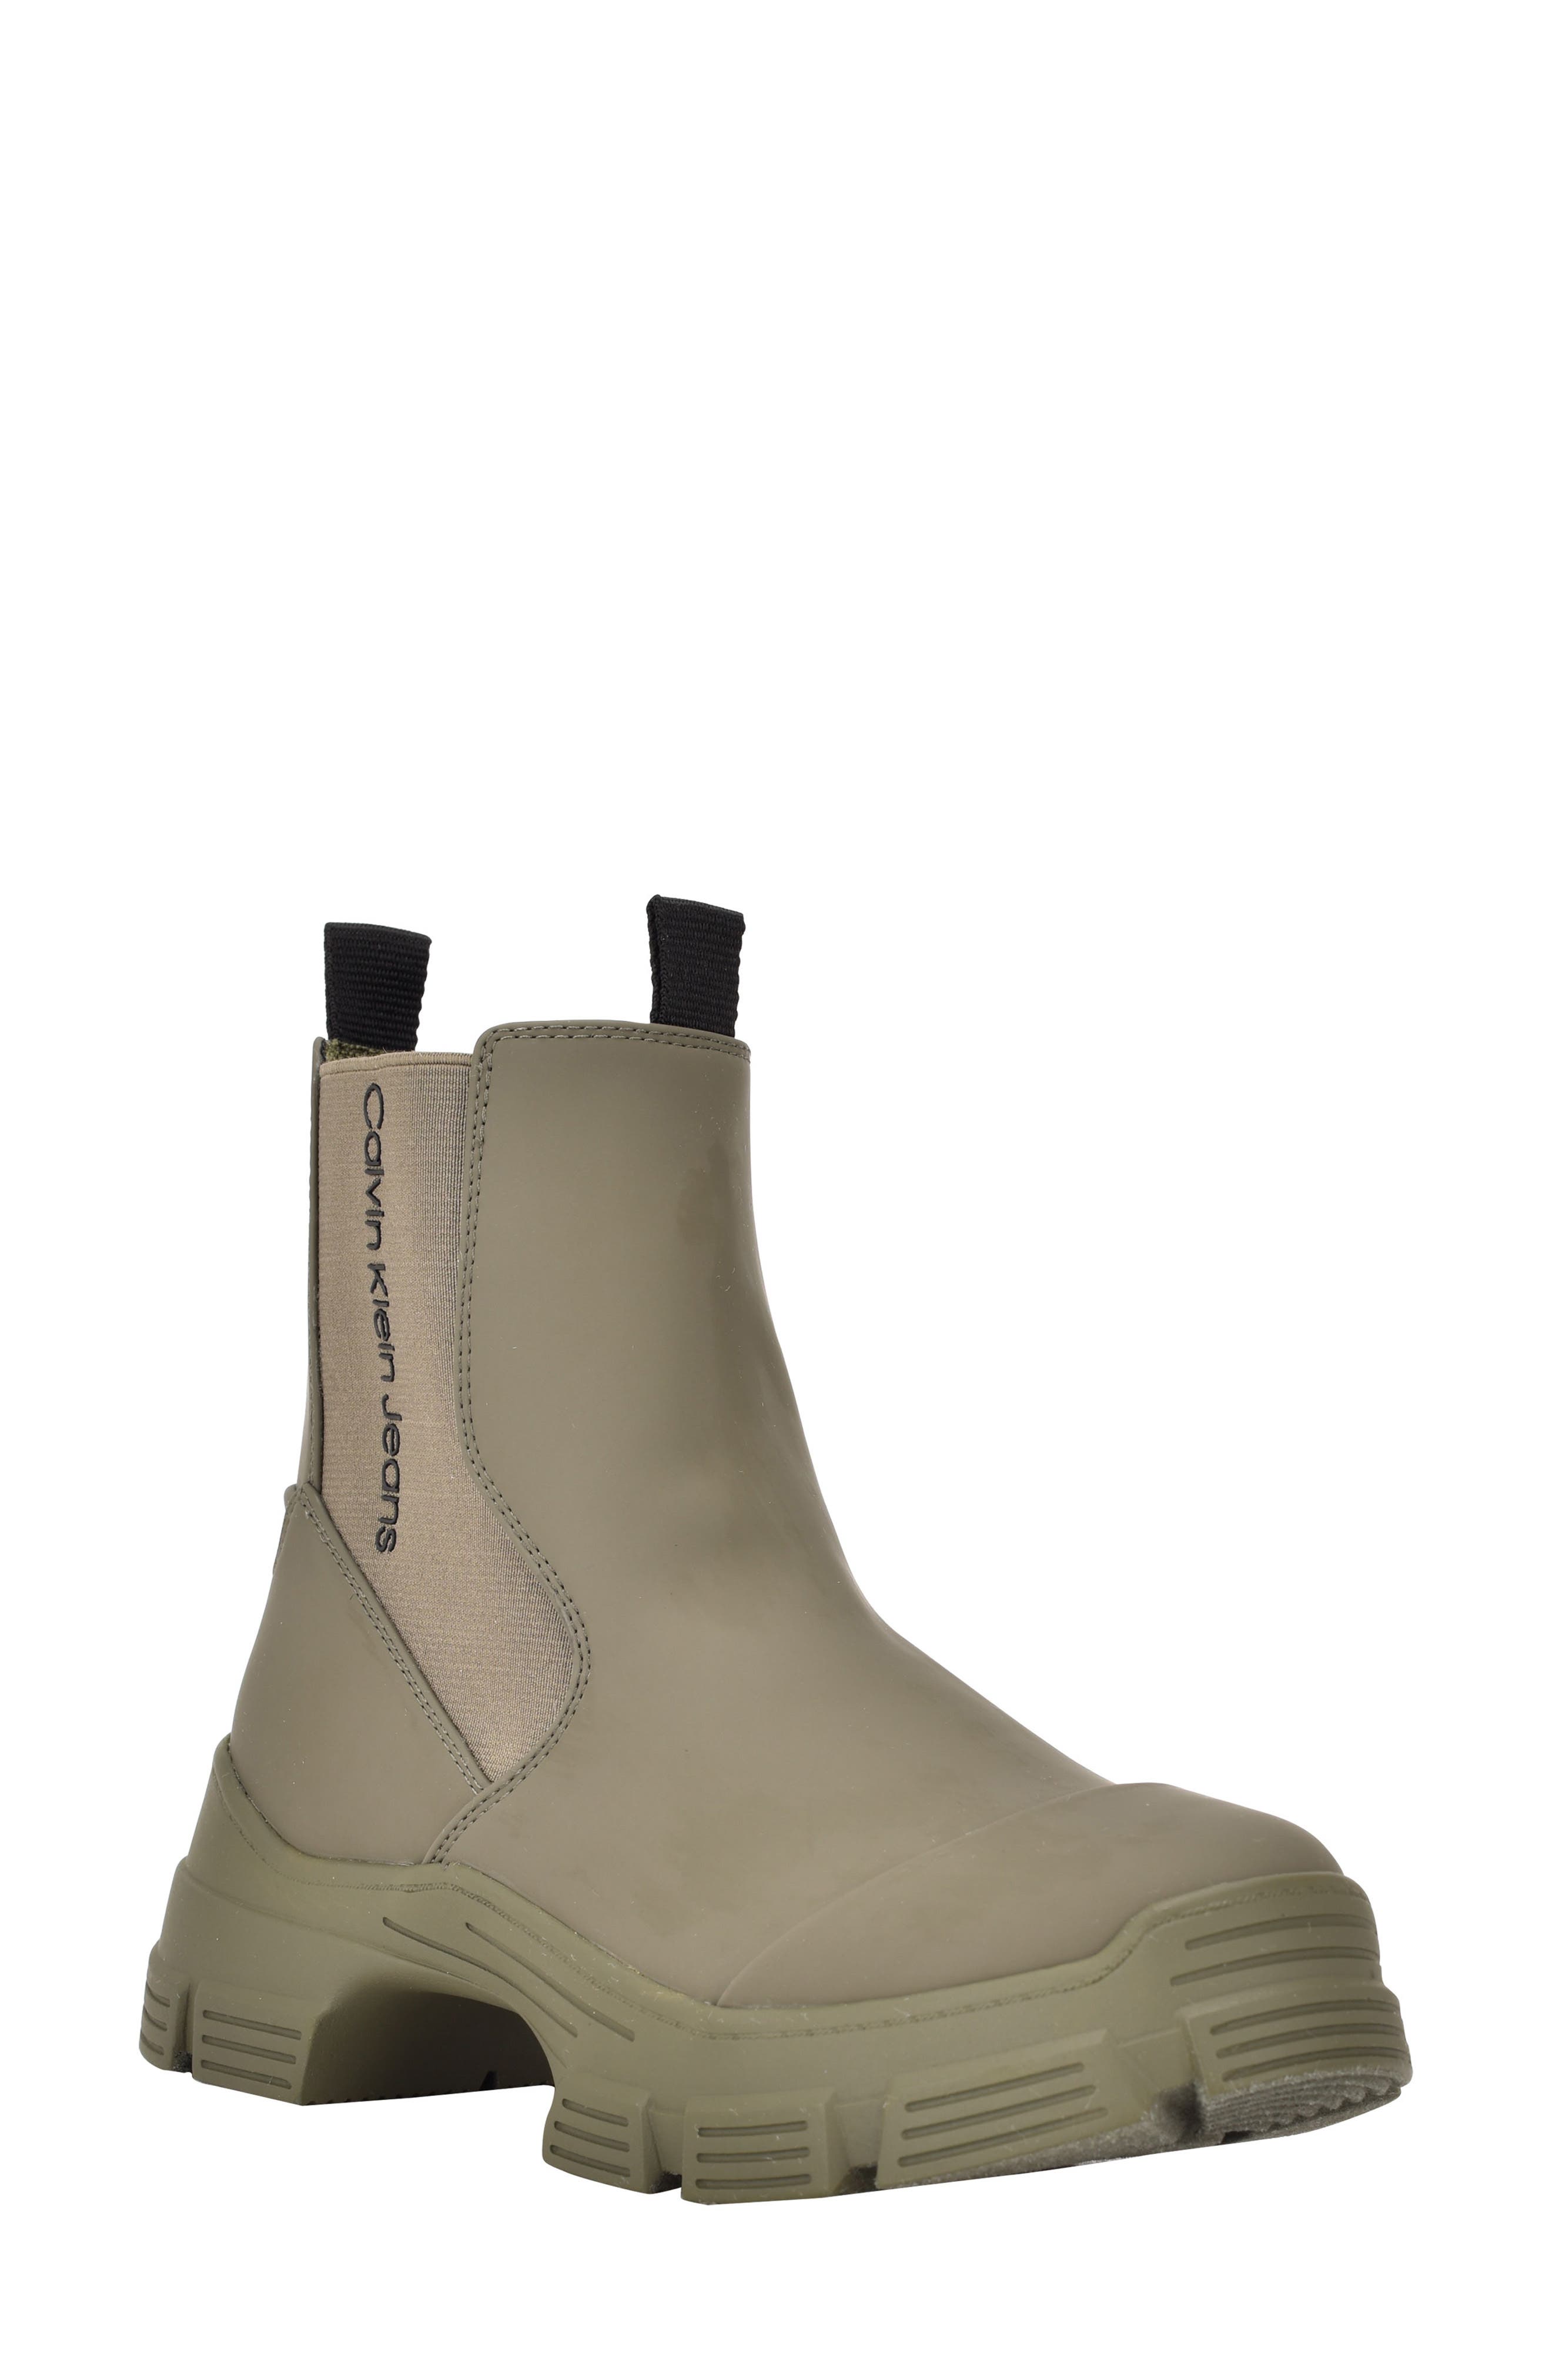 UPC 195972418844 product image for Women's Calvin Klein Dolly Chelsea Boot, Size 8.5 M - Green | upcitemdb.com